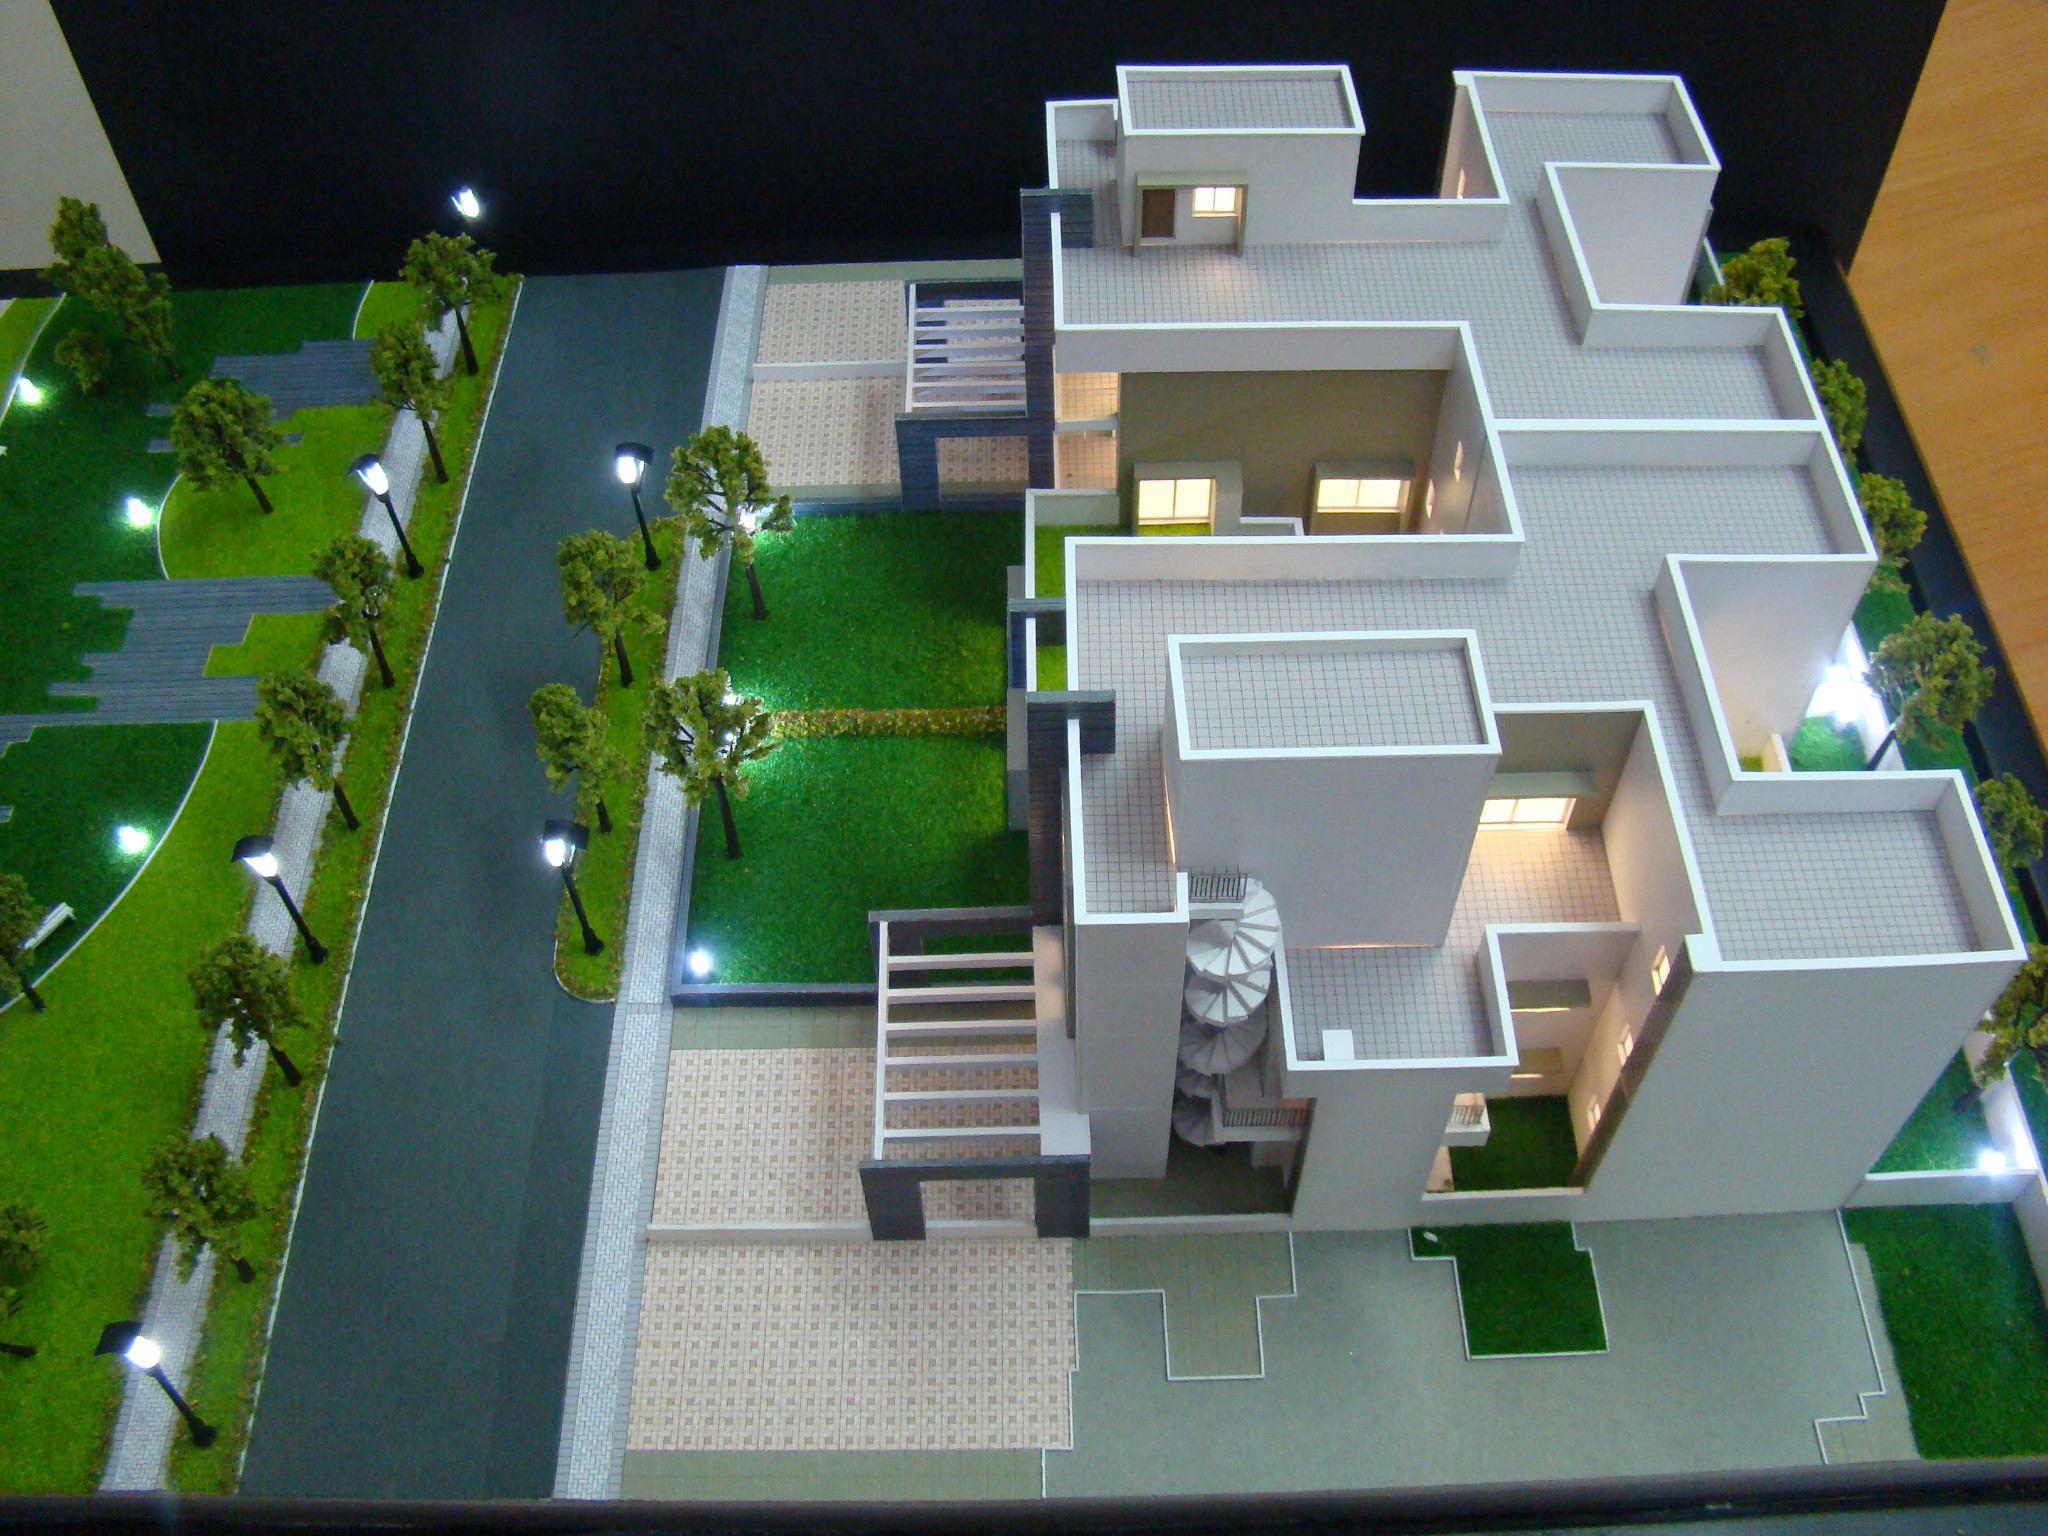 Architectural Models Makers In India Newindiahobbycentre Com